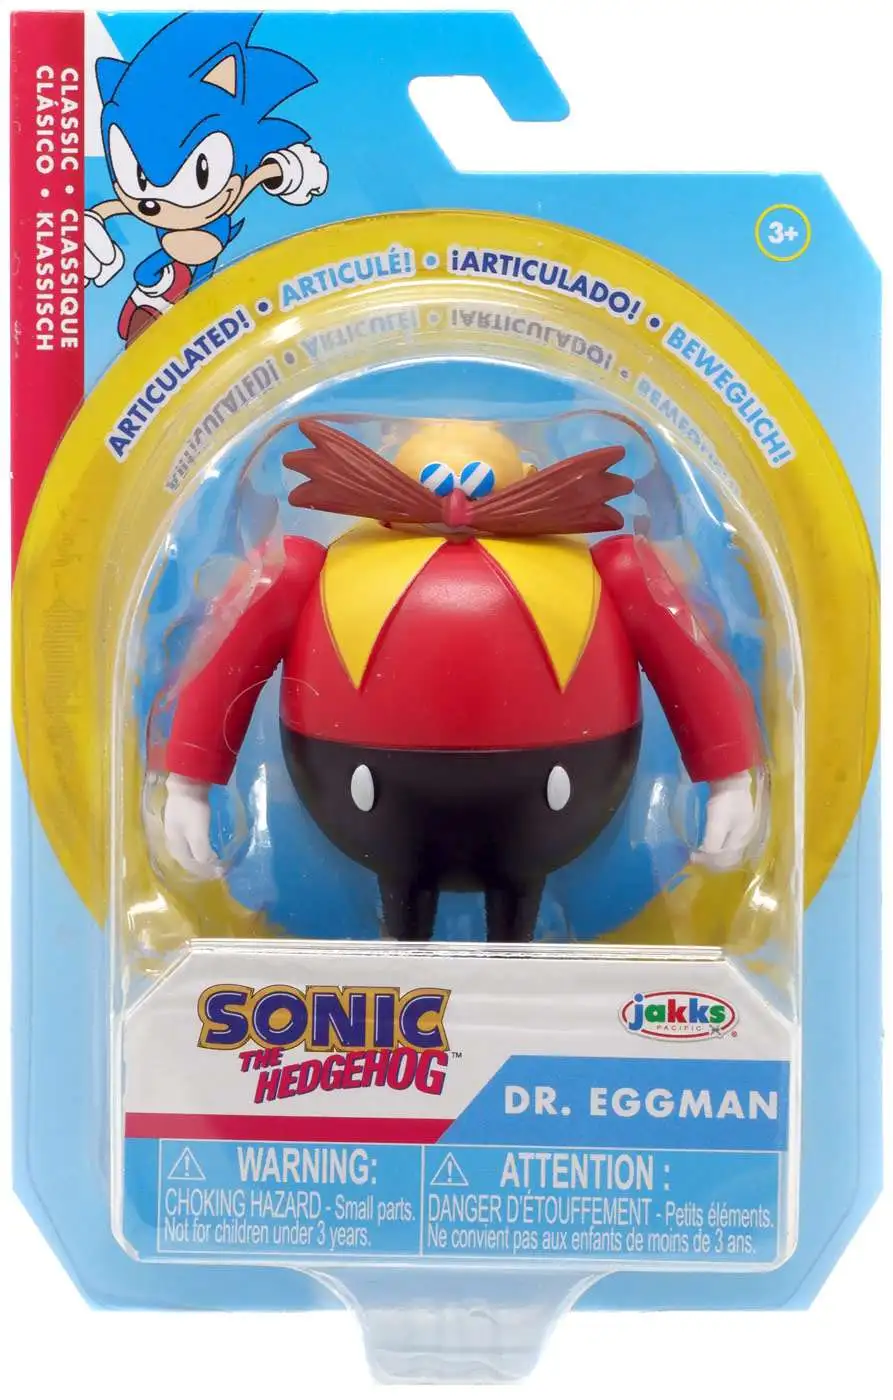 Sonic The Hedgehog 2.5-Inch Action Figure Classic Mighty Collectible Toy